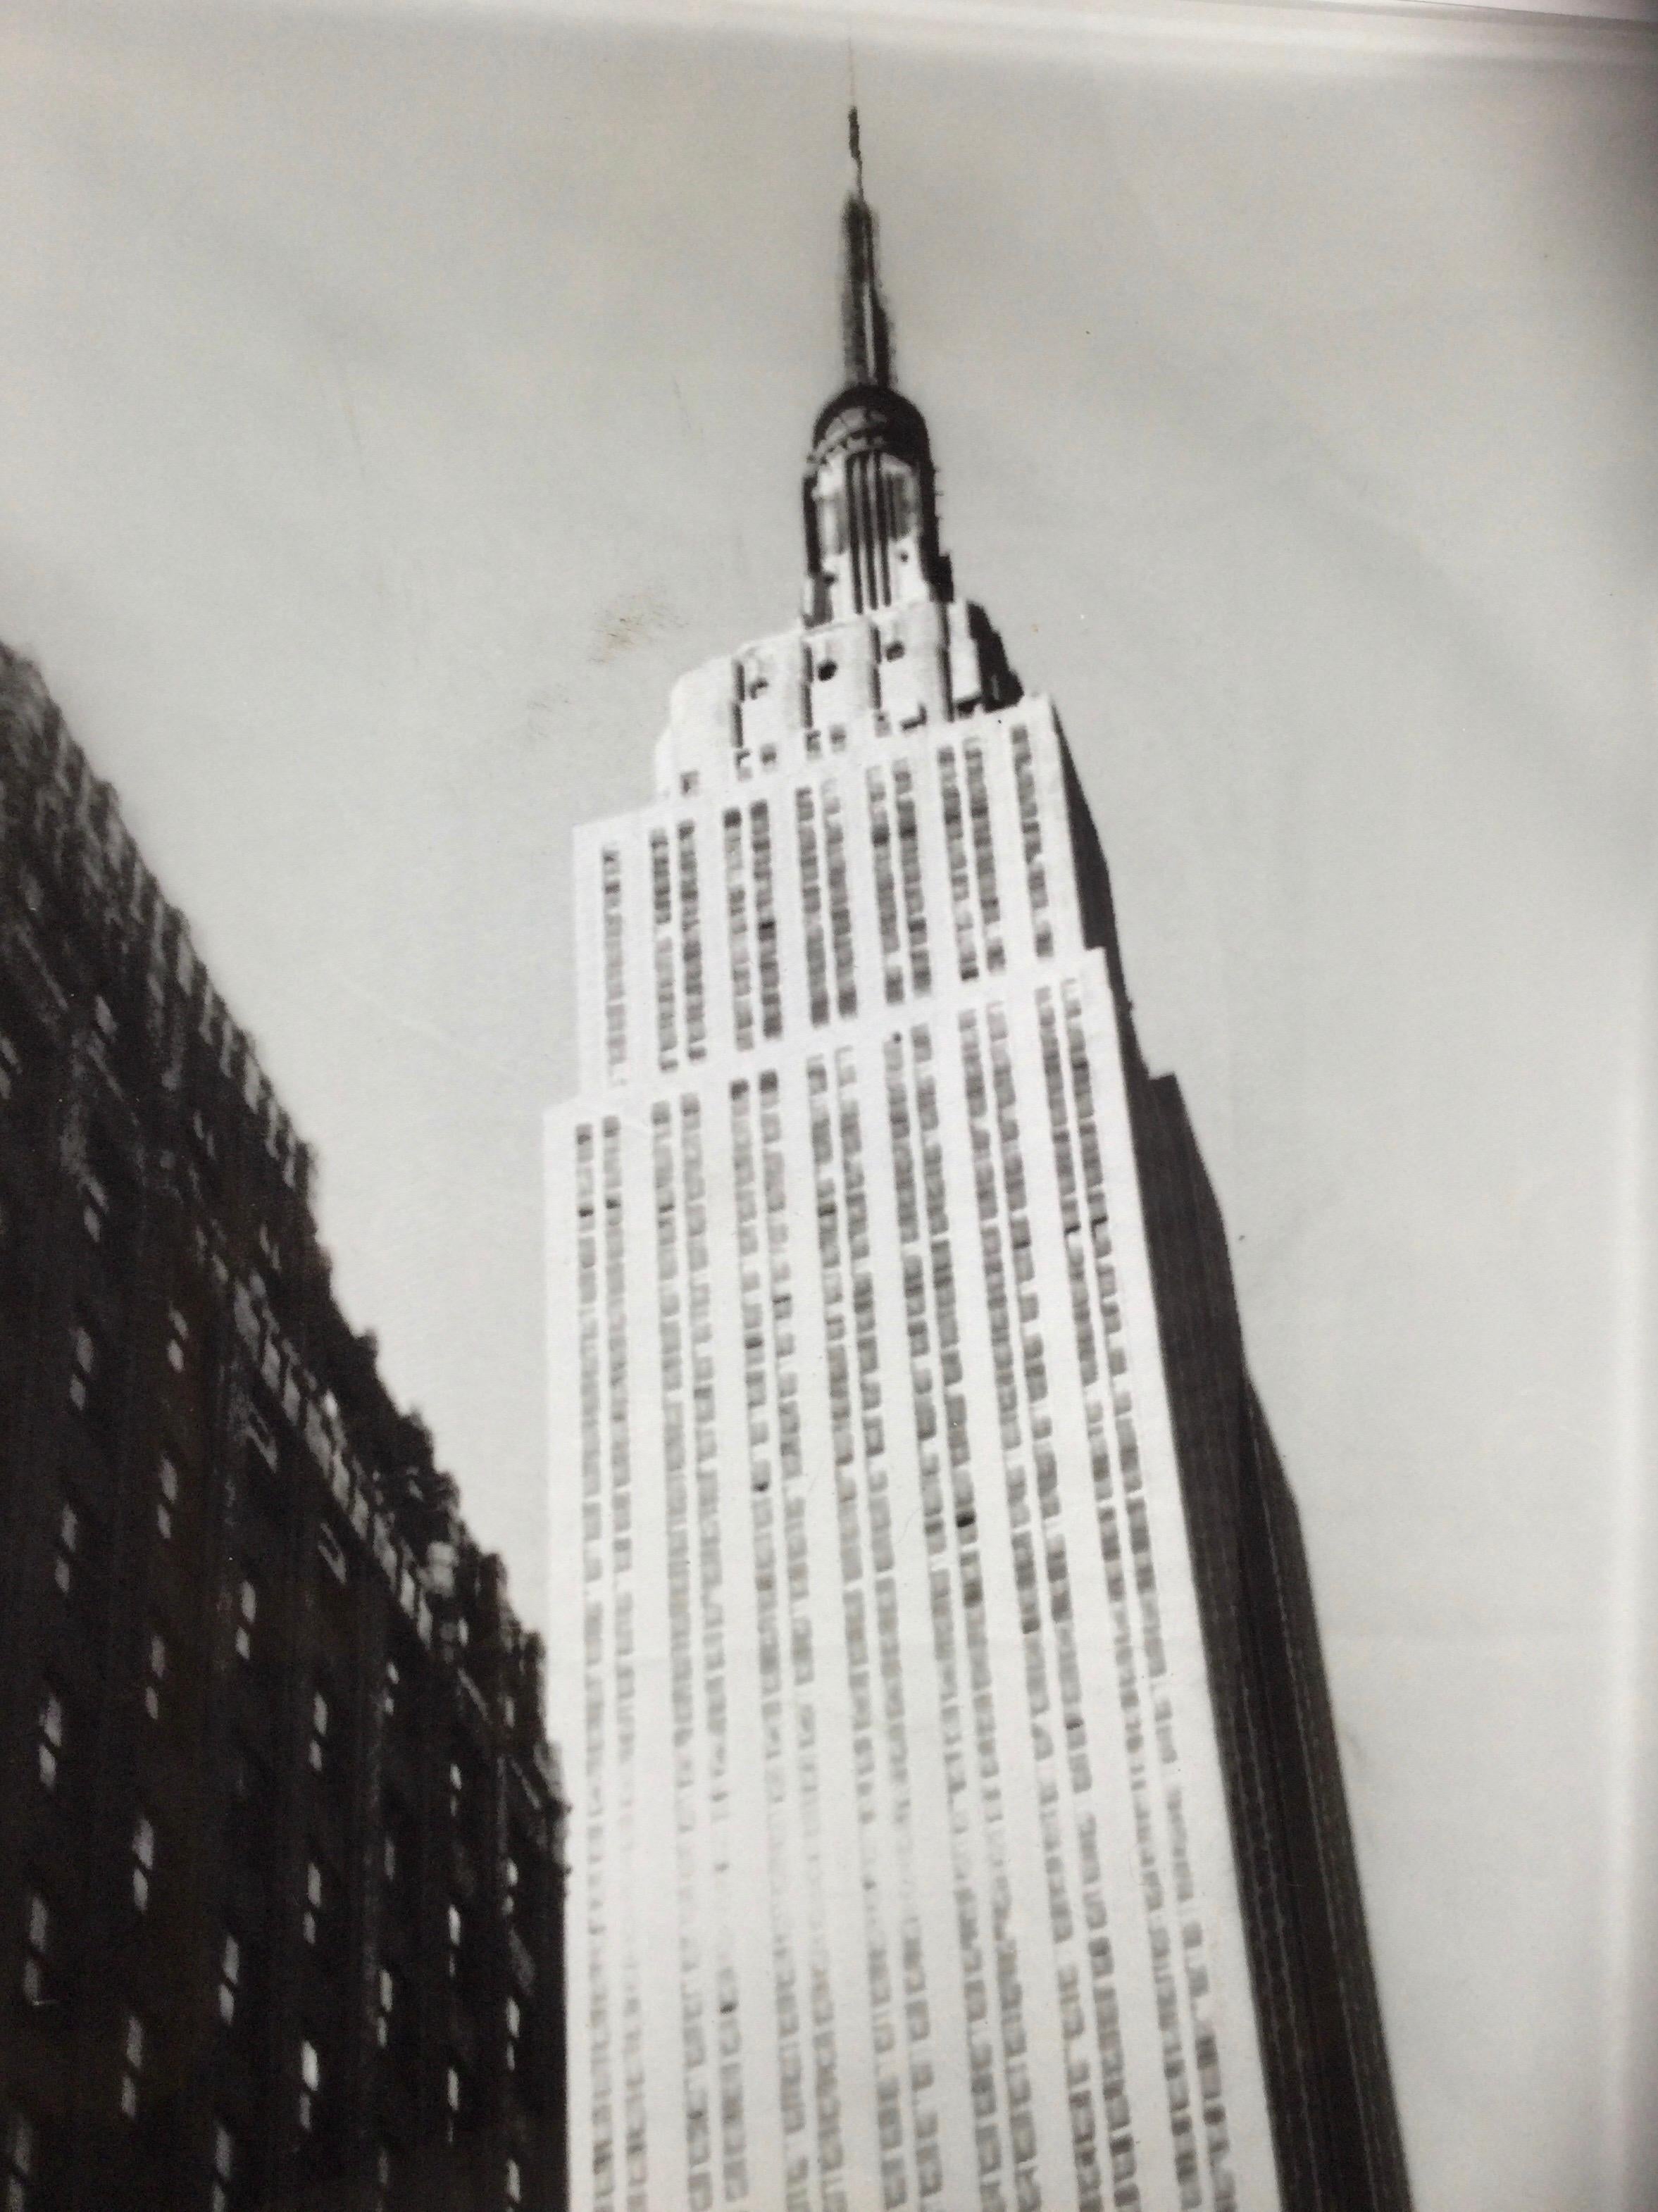 Excellent vintage Andy Warhol glass tray produced by Rosenthal Germany, 1980. The image features a still shot of the Empire State Building in NYC.